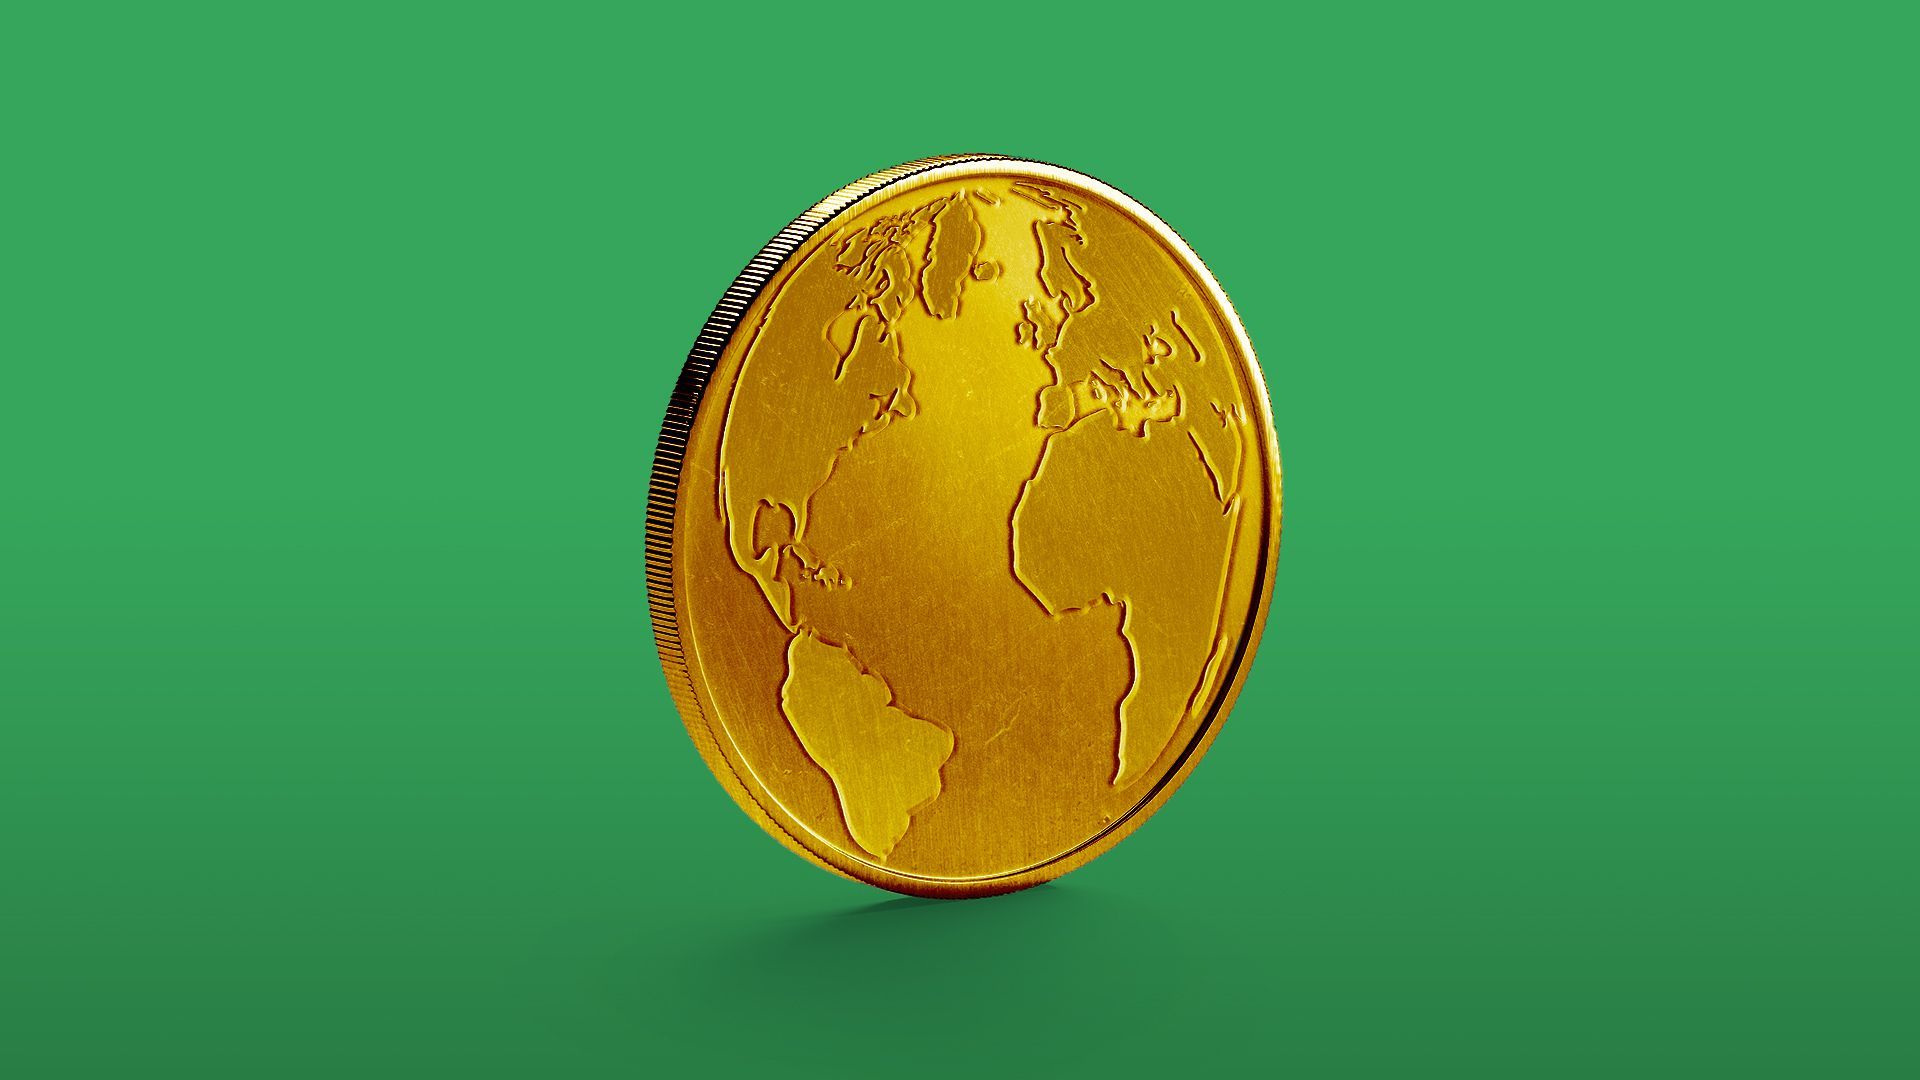 Illustration of a golden coin with an emboss of the Earth on it.  